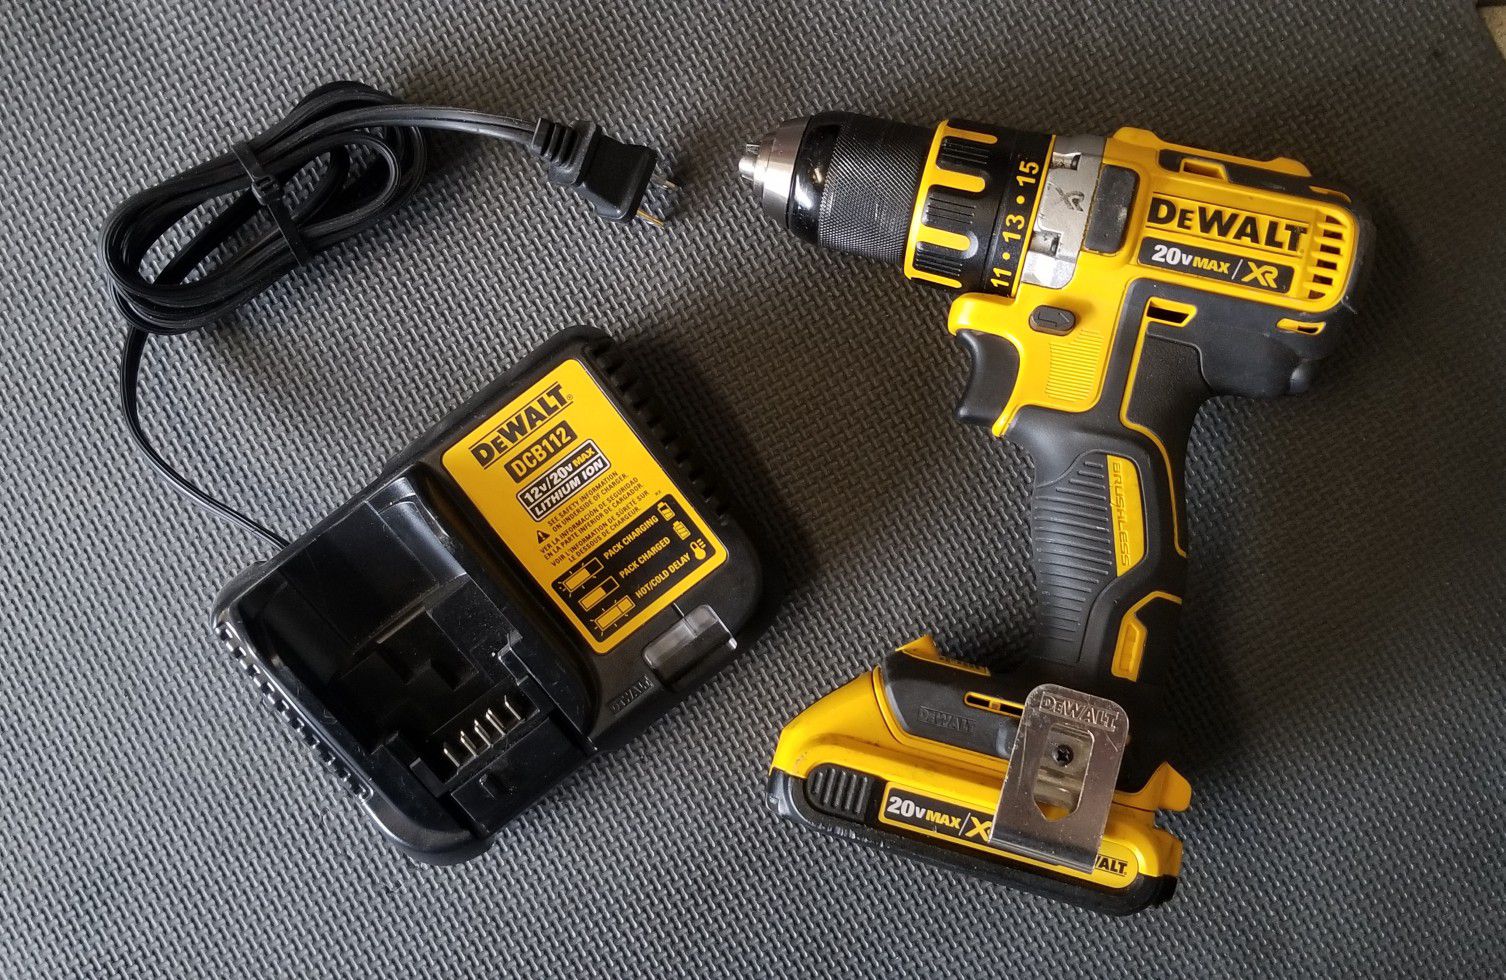 Dewalt 20v Drill w Charger and Battery